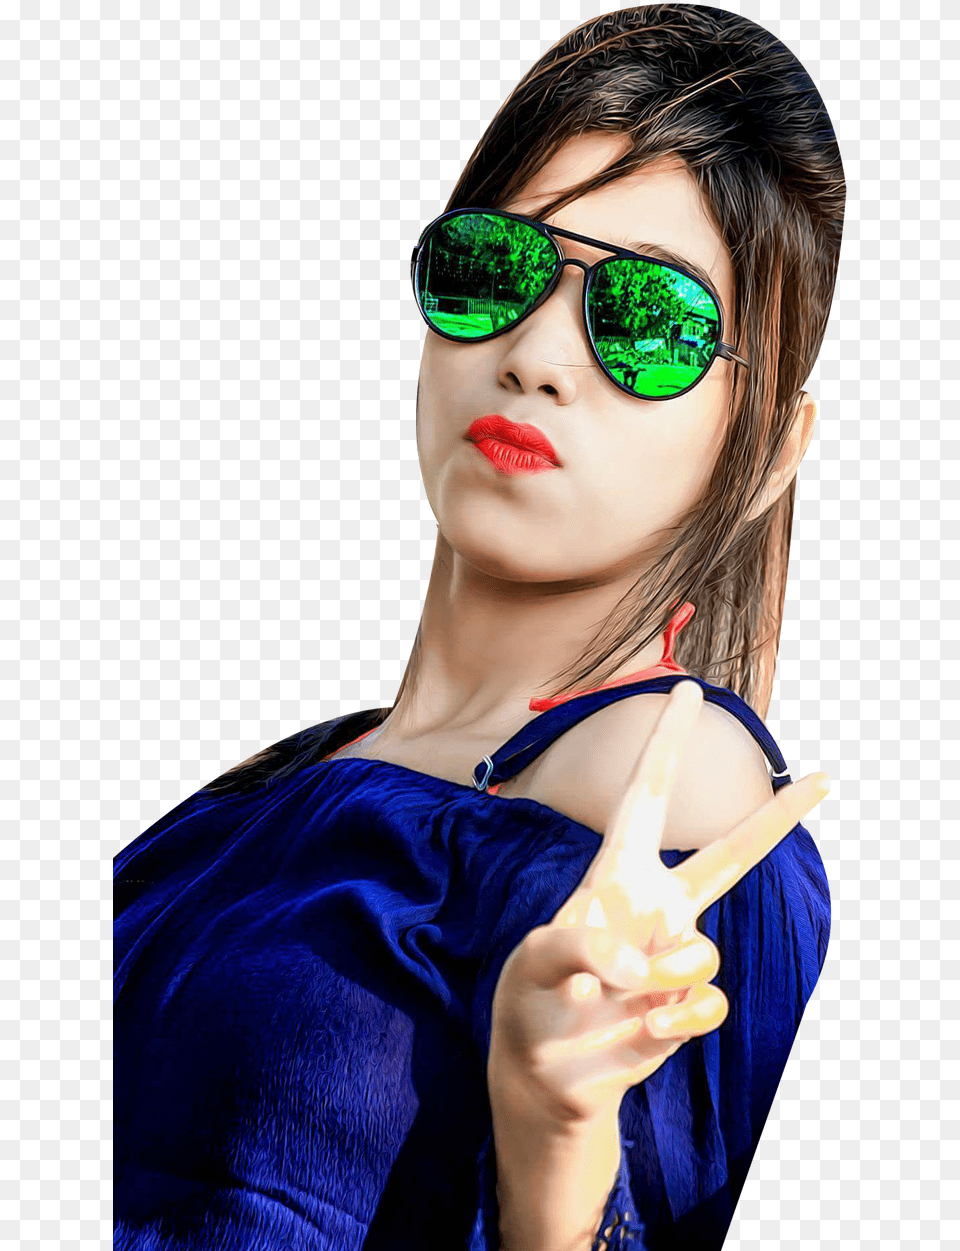 Full Hd Girls Download Girl Hd Background, Accessories, Sunglasses, Portrait, Photography Png Image